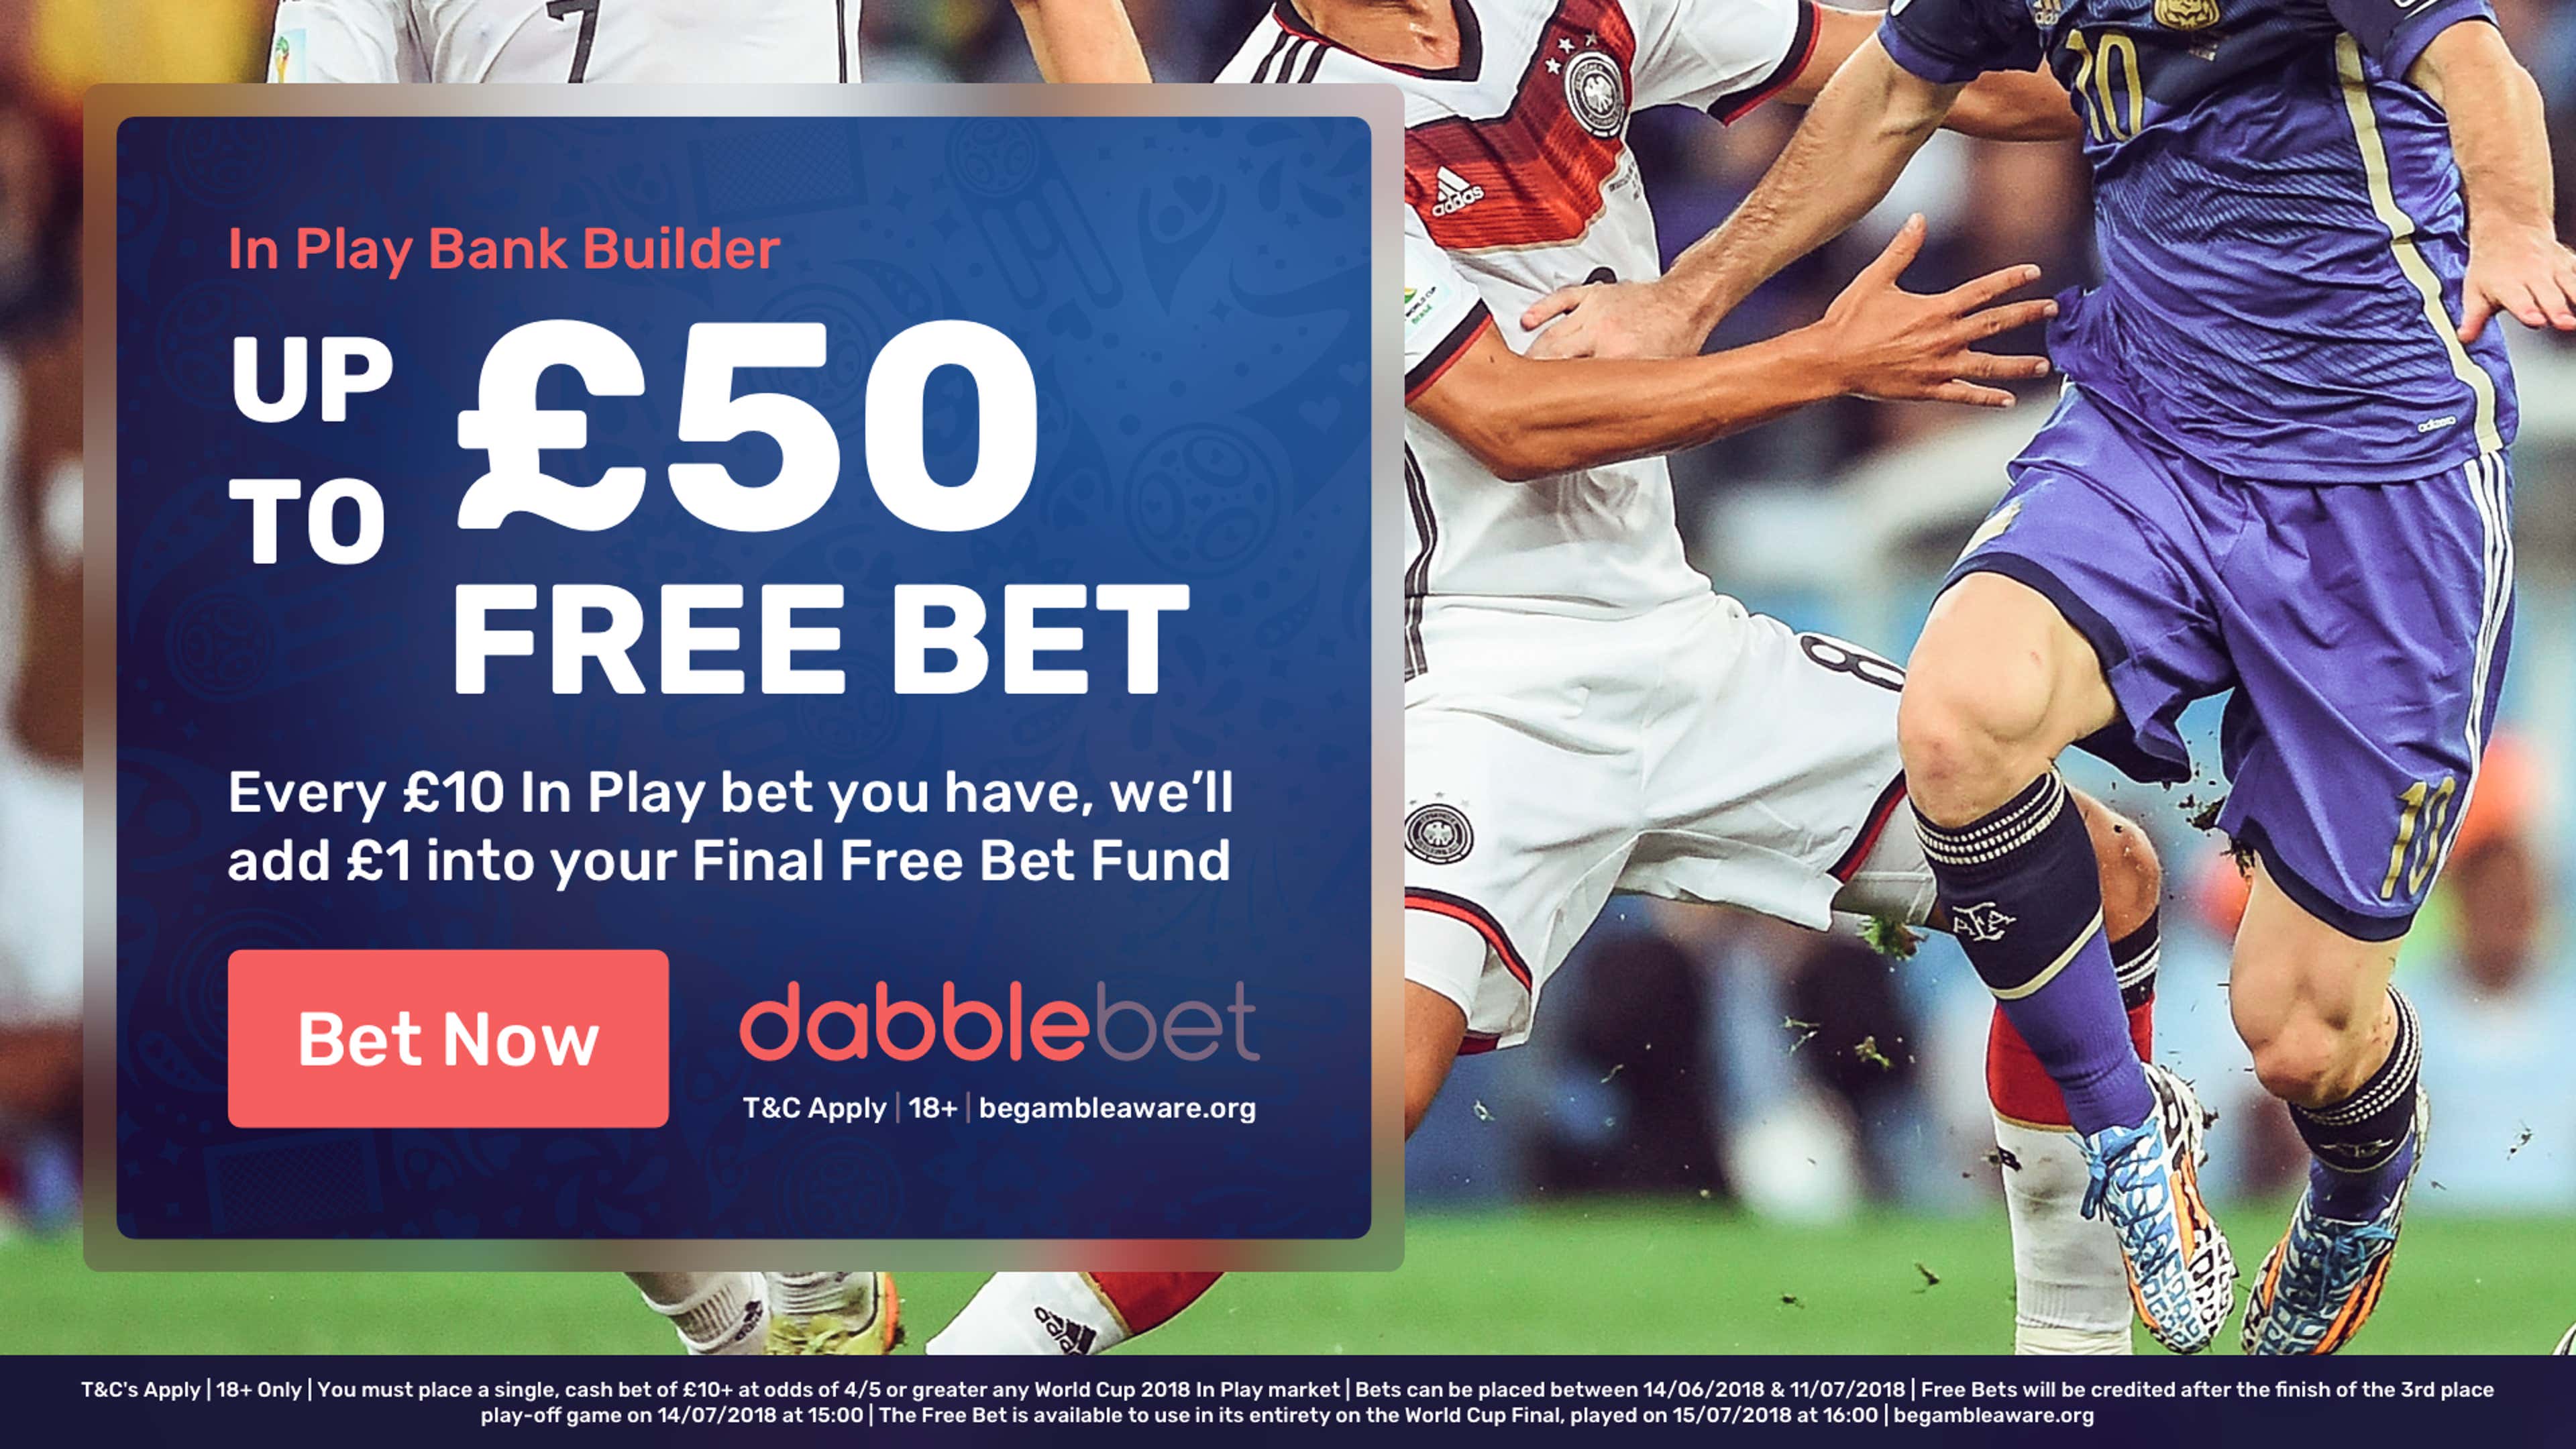 dabblebet in-play free bet World Cup final bank builder in article